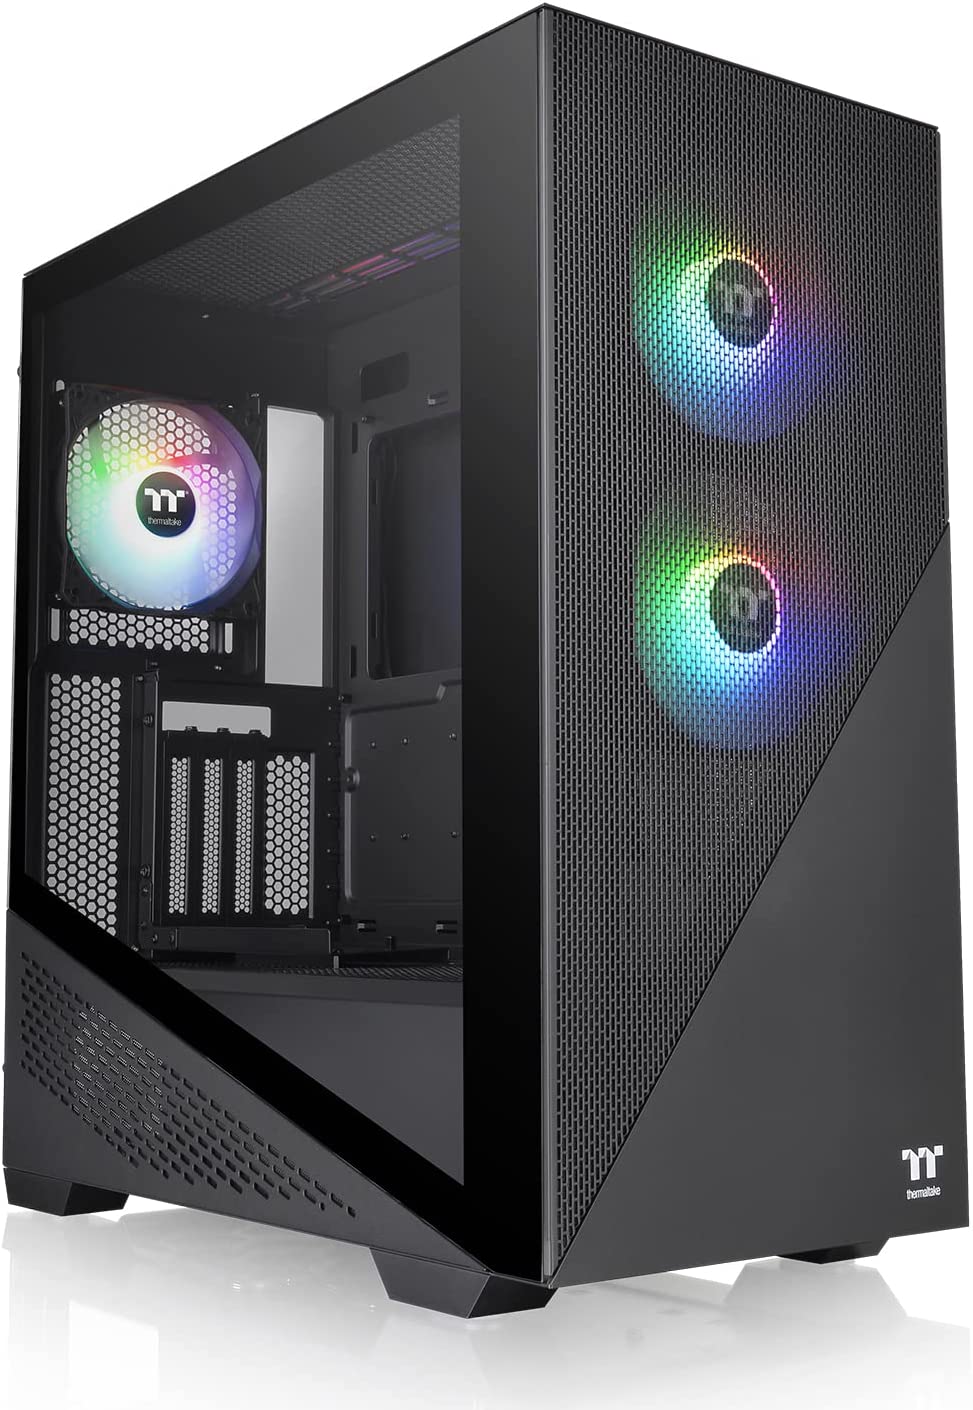 Thermaltake Divider 370 TG ARGB Motherboard Sync E-ATX Mid Tower Computer Case with 3x120mm ARGB Fan Pre-Installed, Tempered Glass Side Panel, Ventilated Front Mesh Panel, CA-1S4-00M1WN-00, Black Divider 370 Black